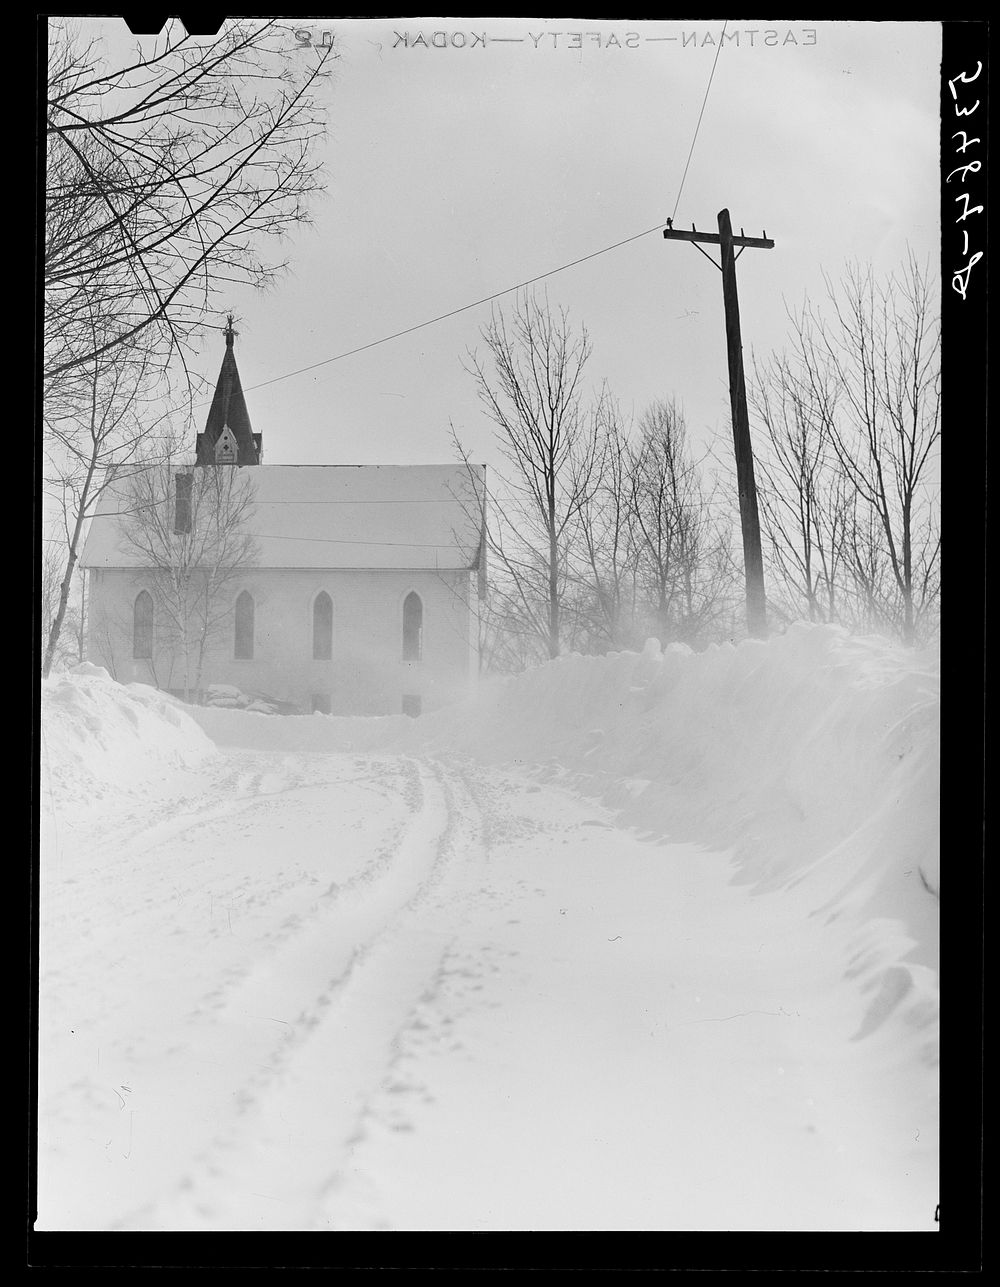 Highway and church near Littleton, New Hampshire. Sourced from the Library of Congress.